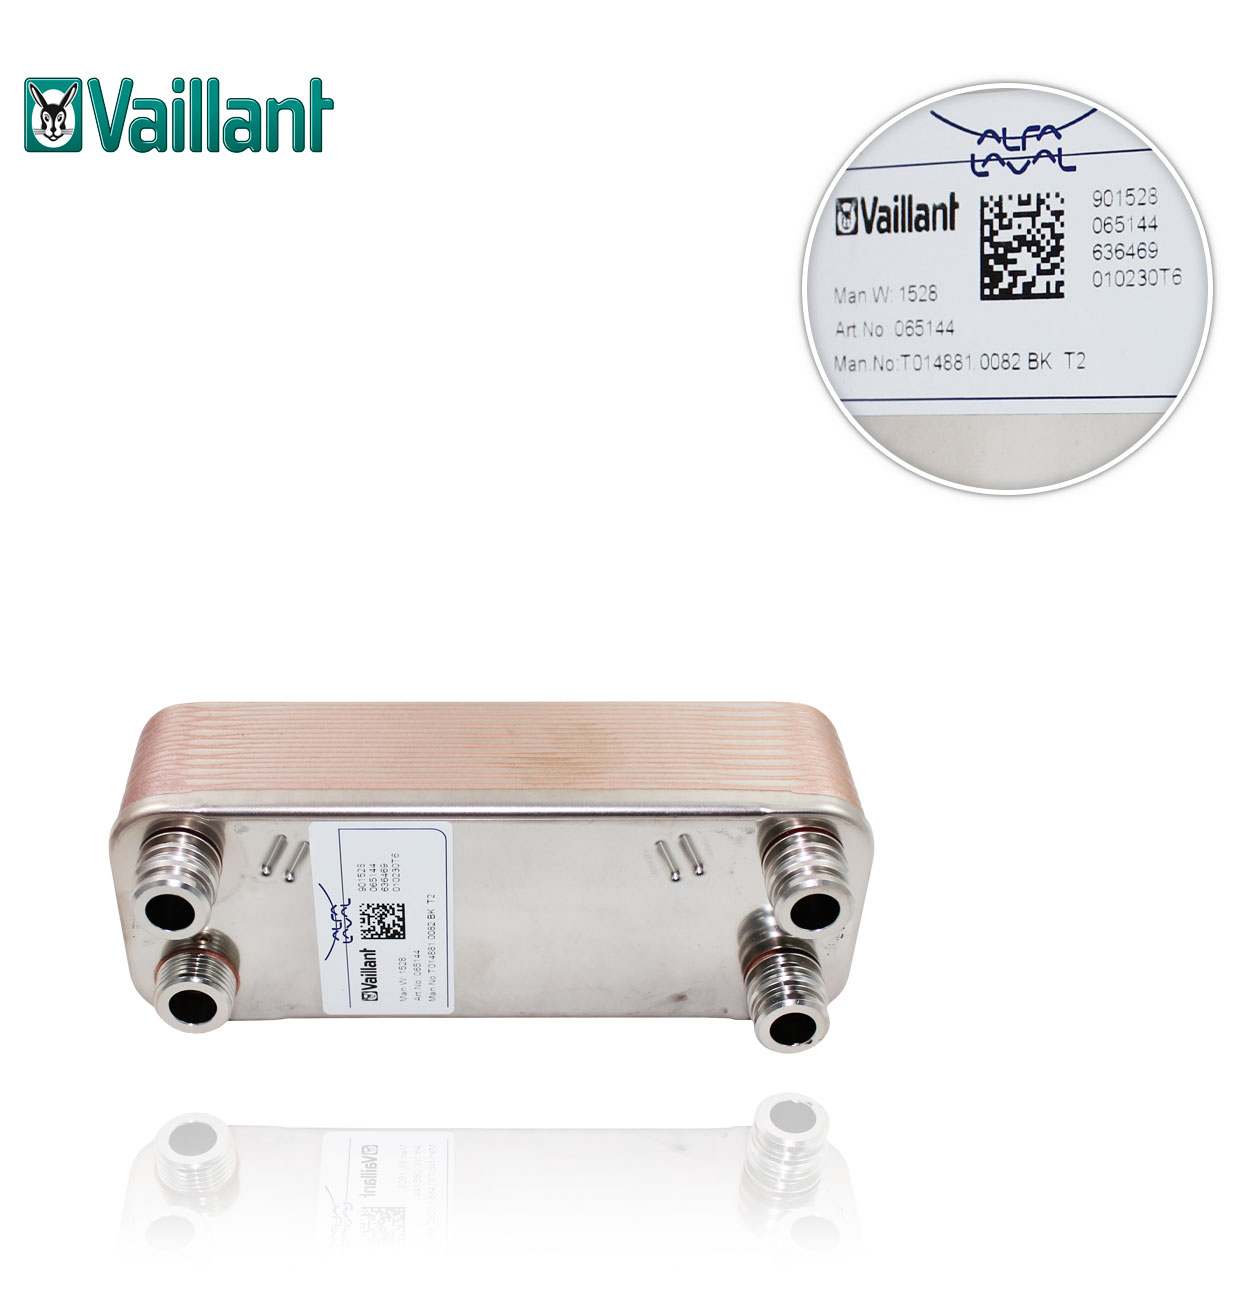 VAILLANT 065153 20 PLATE EXCHANGER